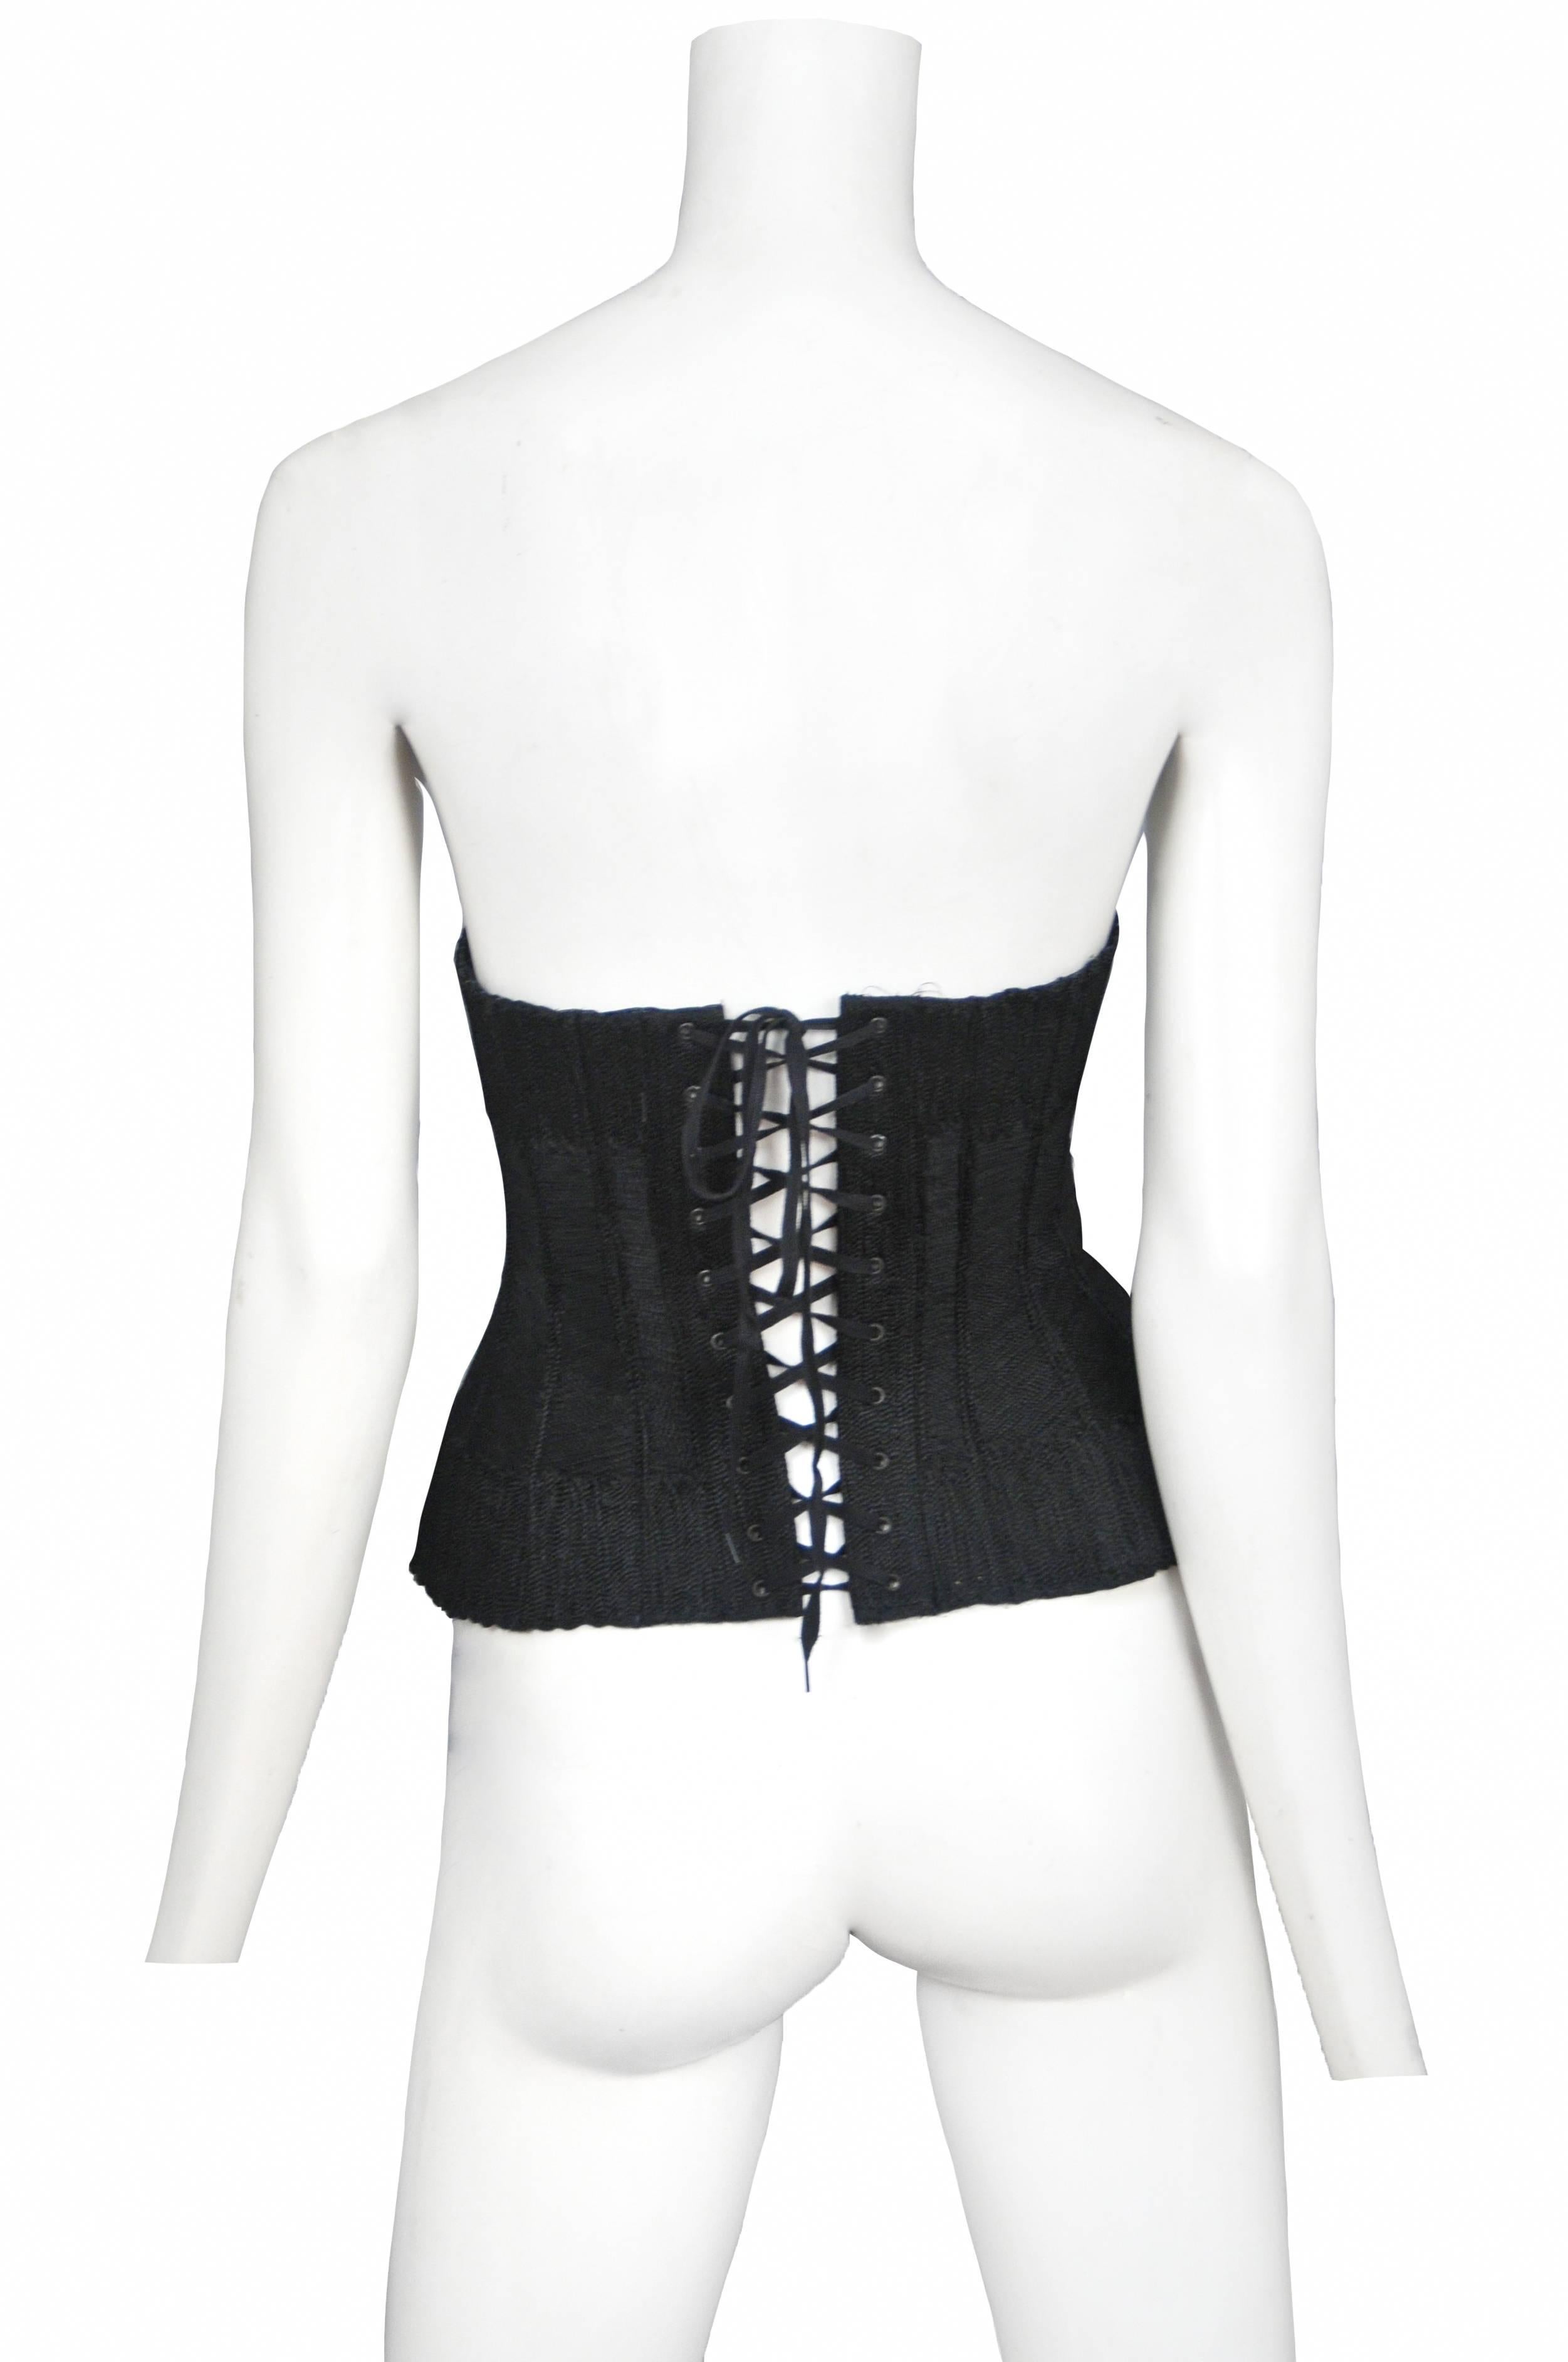 Vintage Jean Paul Gaultier black thread embroidered corset featuring a zipper entrance at the front, boning, and lace up detailing at the back.